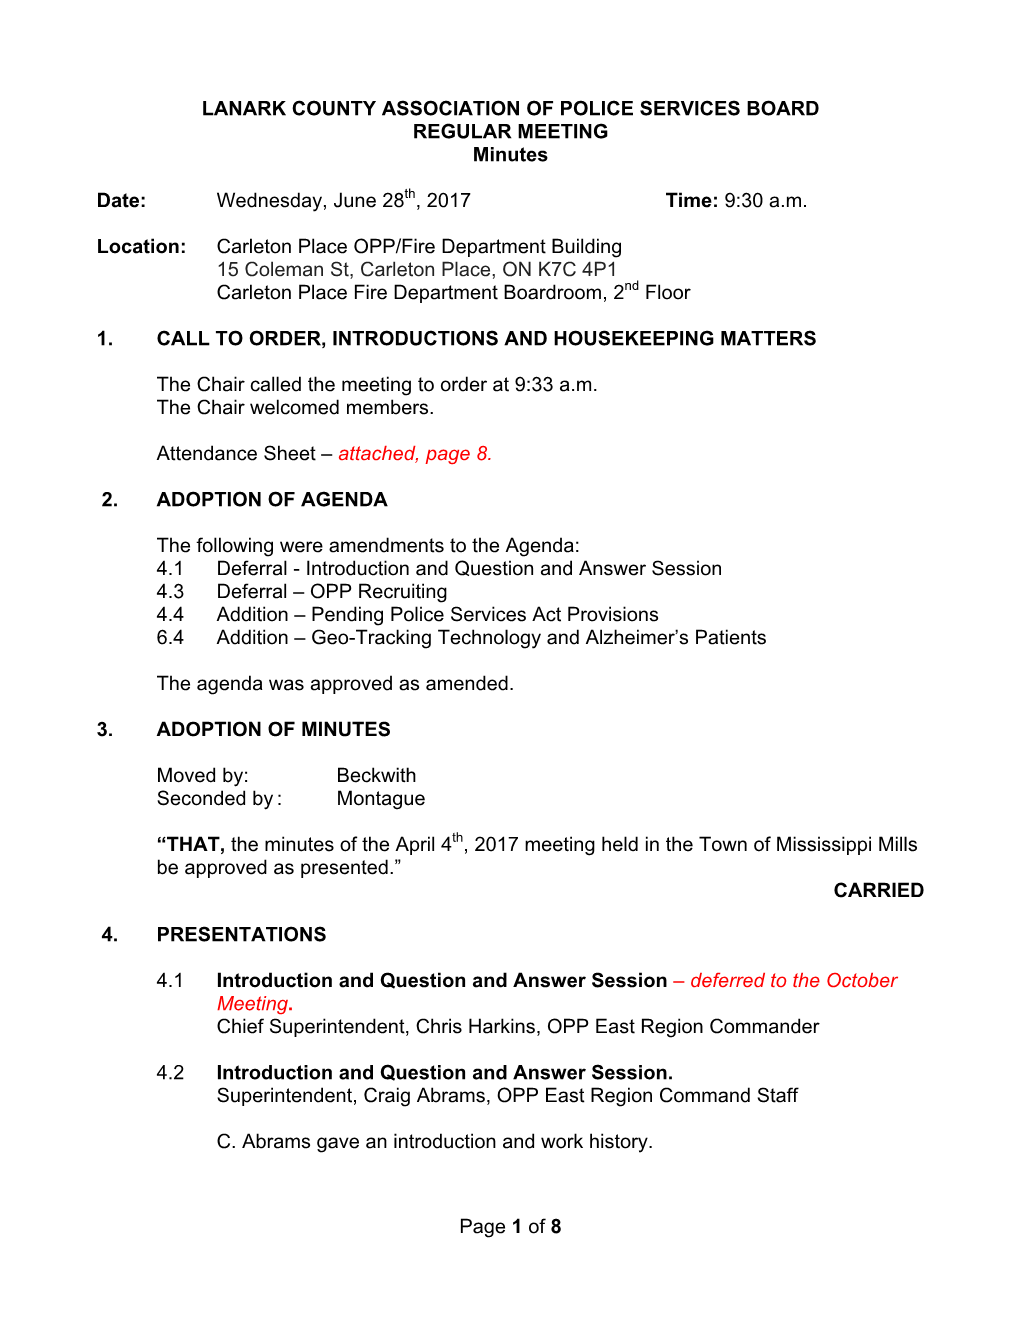 Page 1 of 8 LANARK COUNTY ASSOCIATION of POLICE SERVICES BOARD REGULAR MEETING Minutes Date: Wednesday, June 28Th, 2017 Time: 9